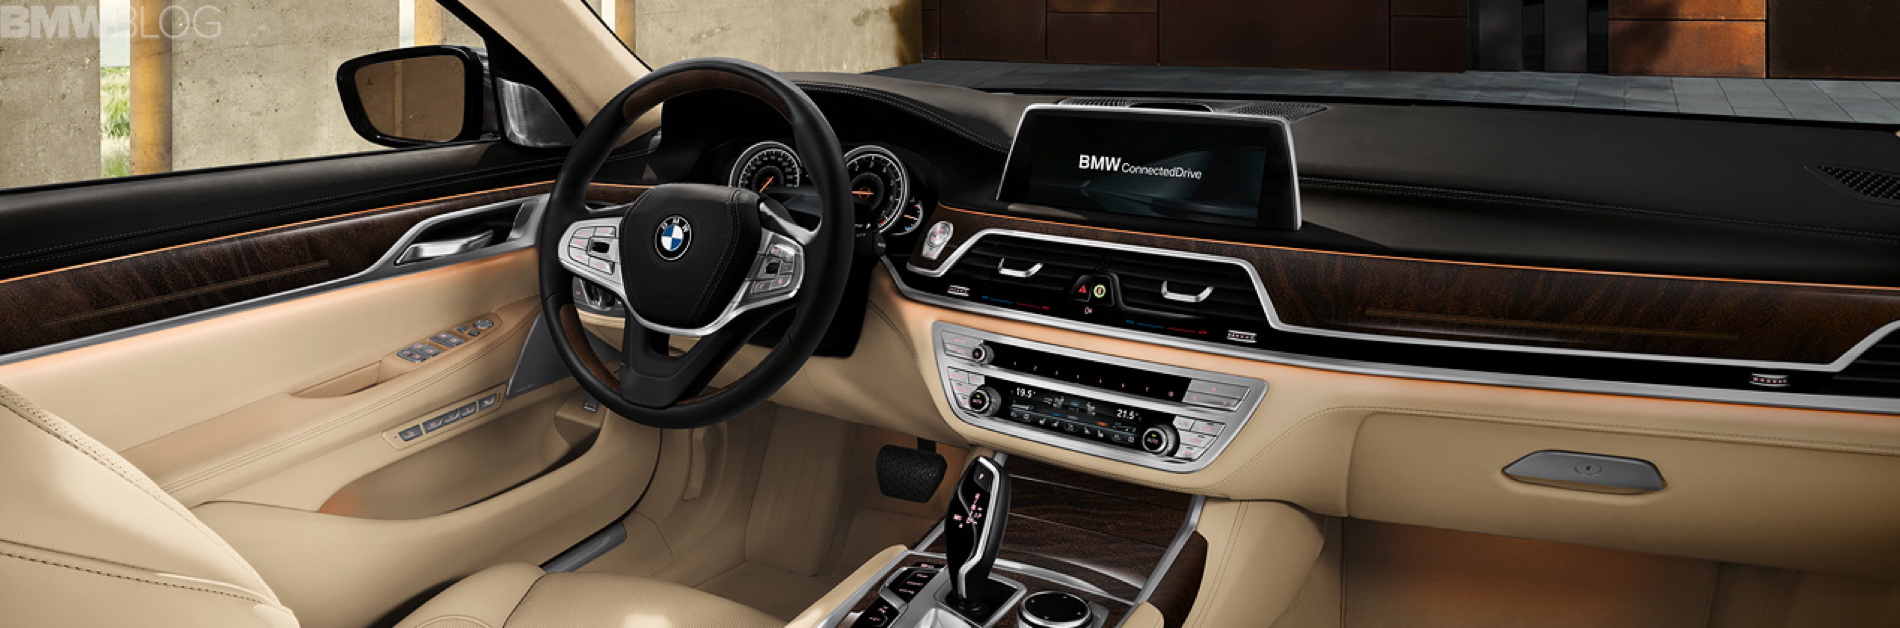 2016 Bmw 7 Series First Look